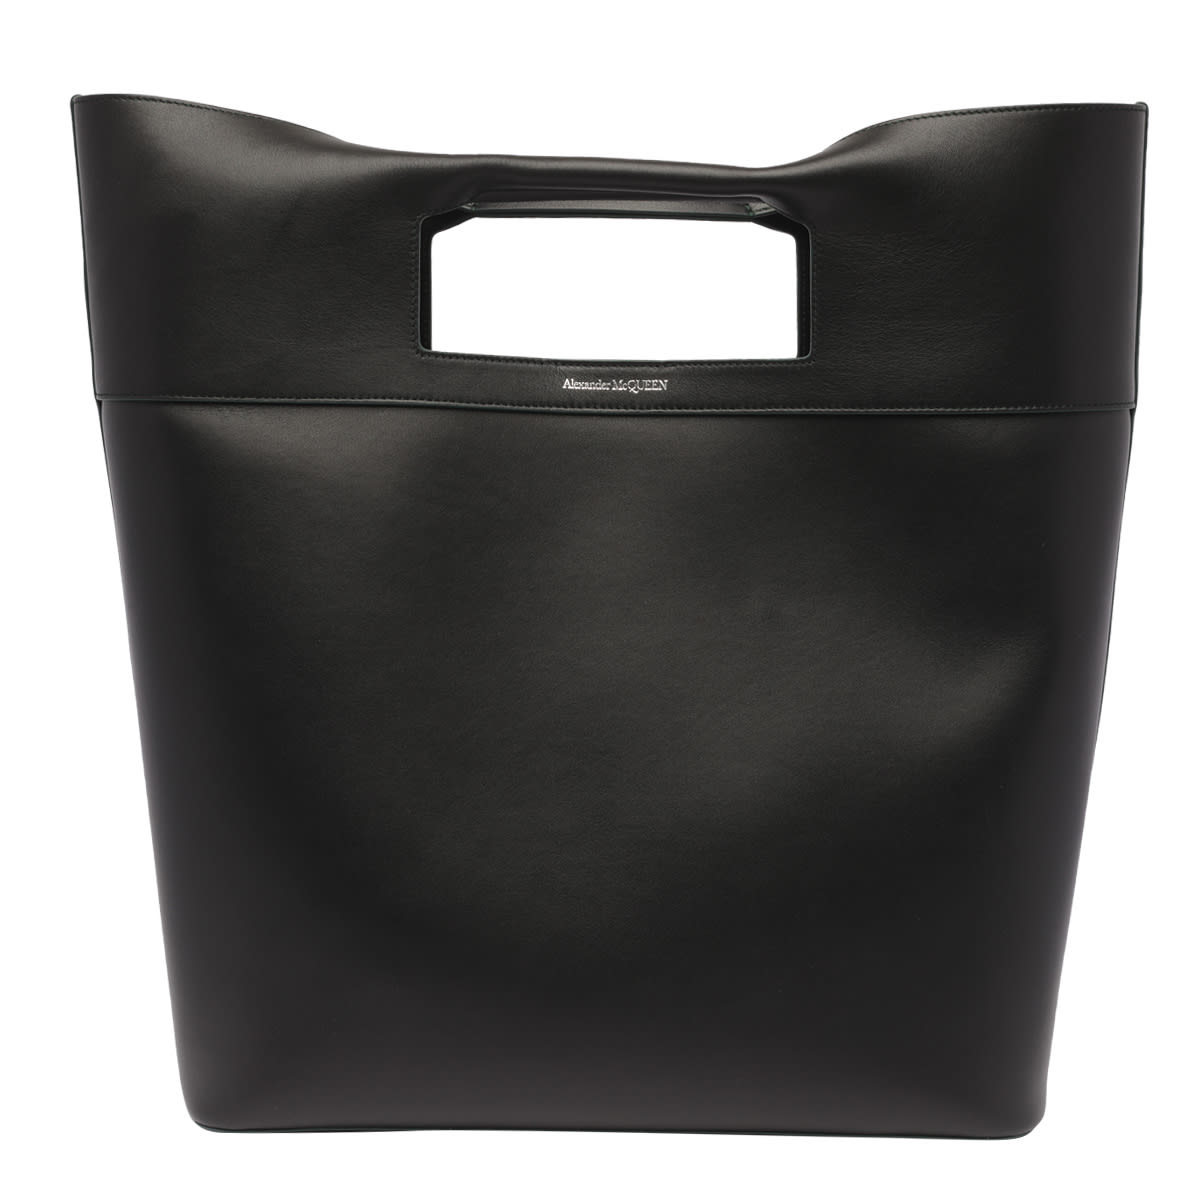 Alexander McQueen The Square Bow Tote Bag - Black - male - Size: 0one size